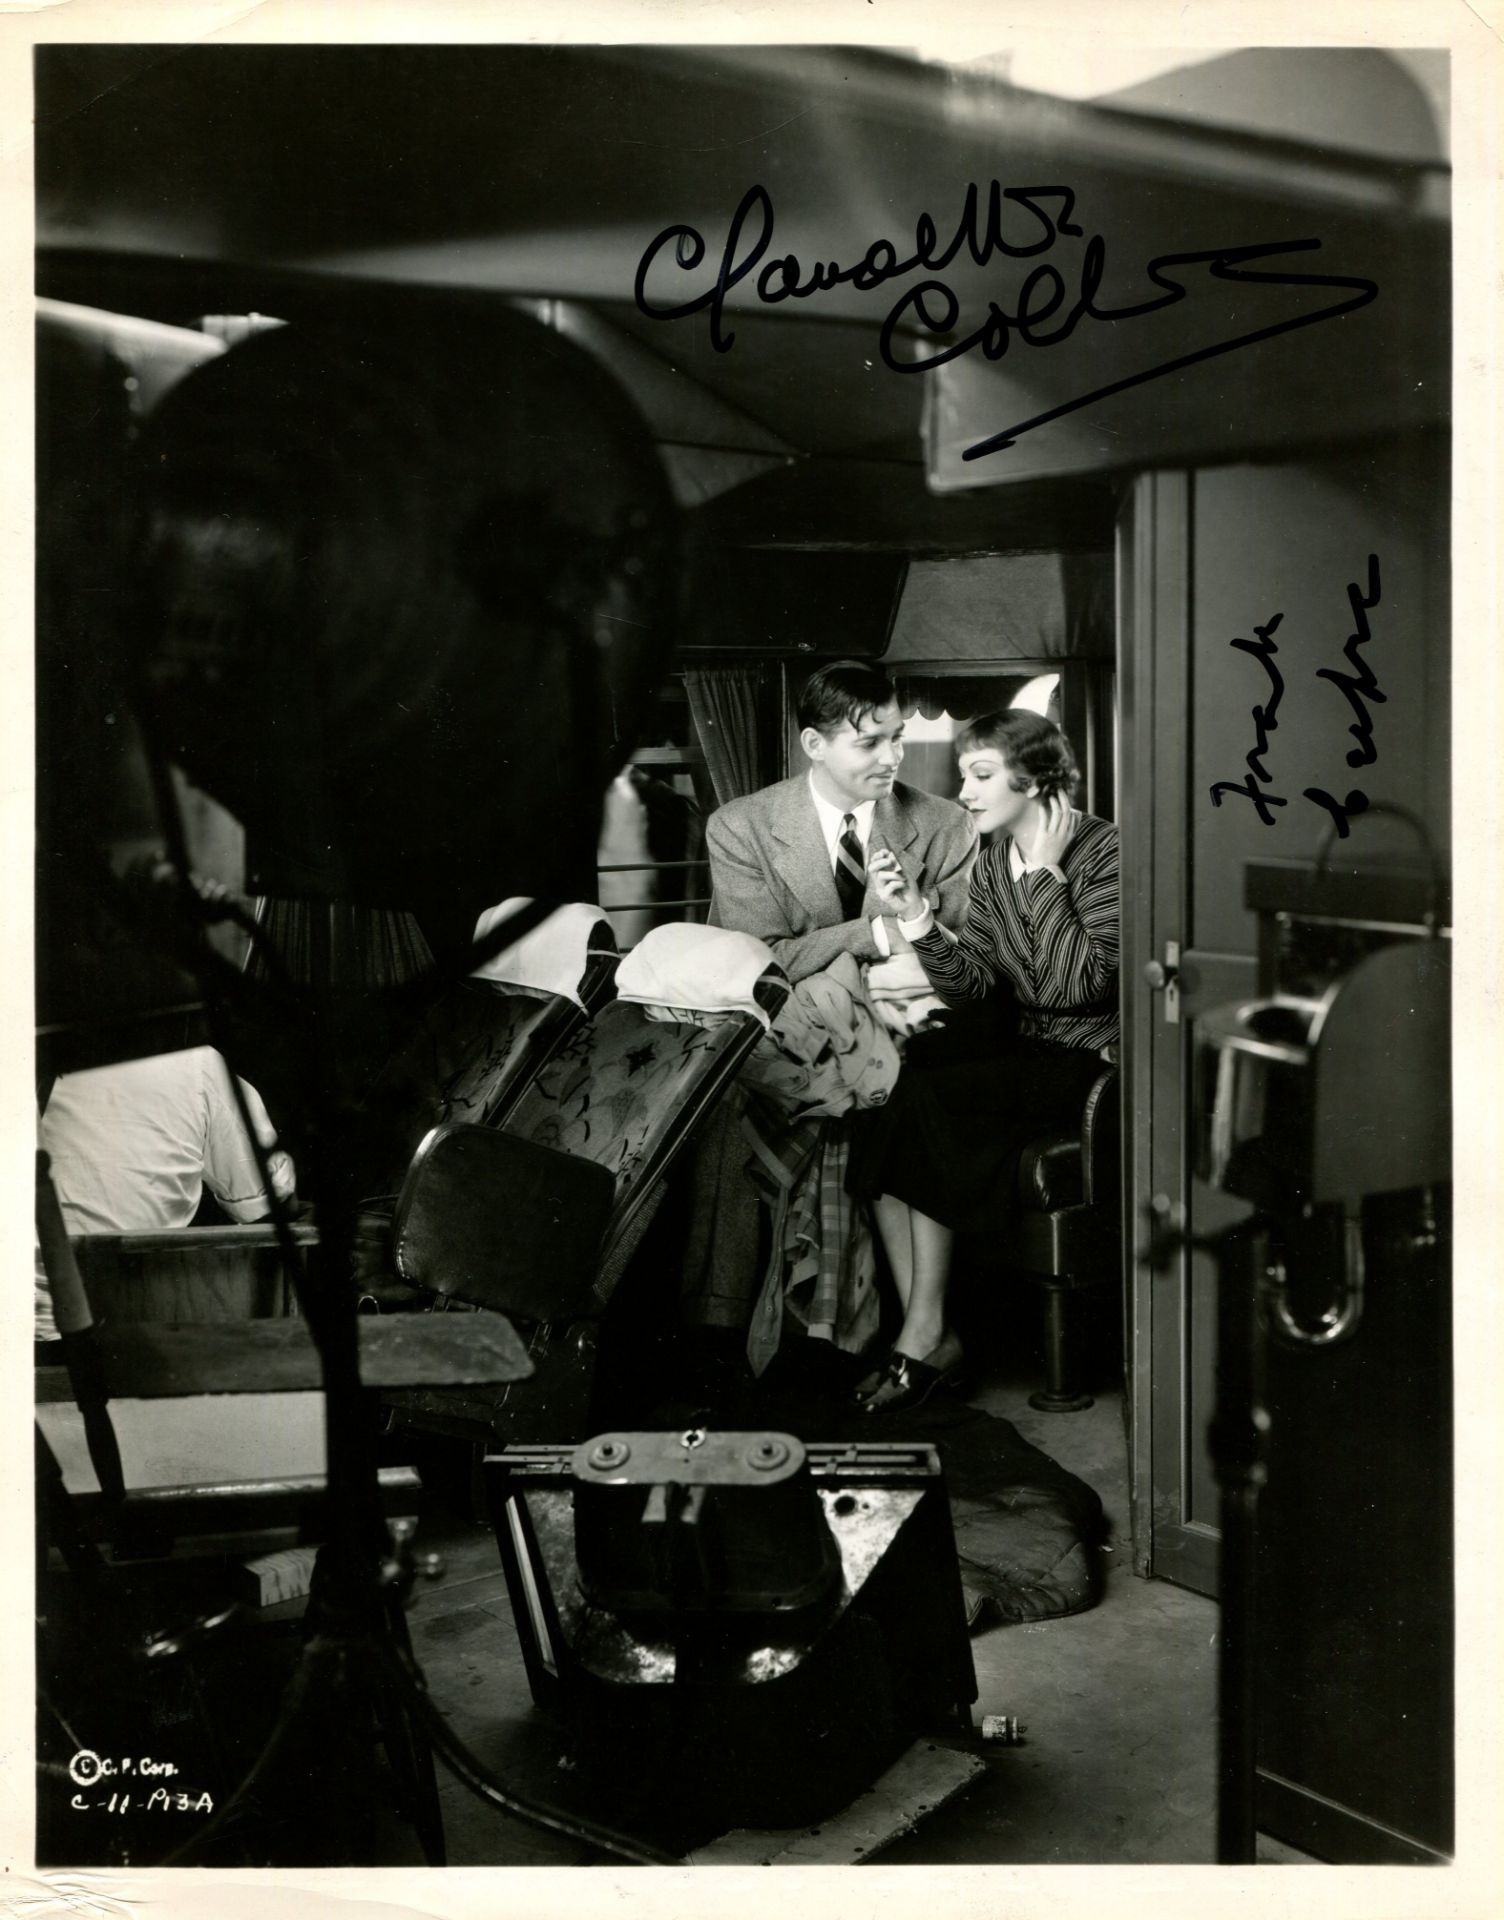 IT HAPPENED ONE NIGHT: Signed 8 x 10 photograph by both Frank Capra (director and co-producer) and